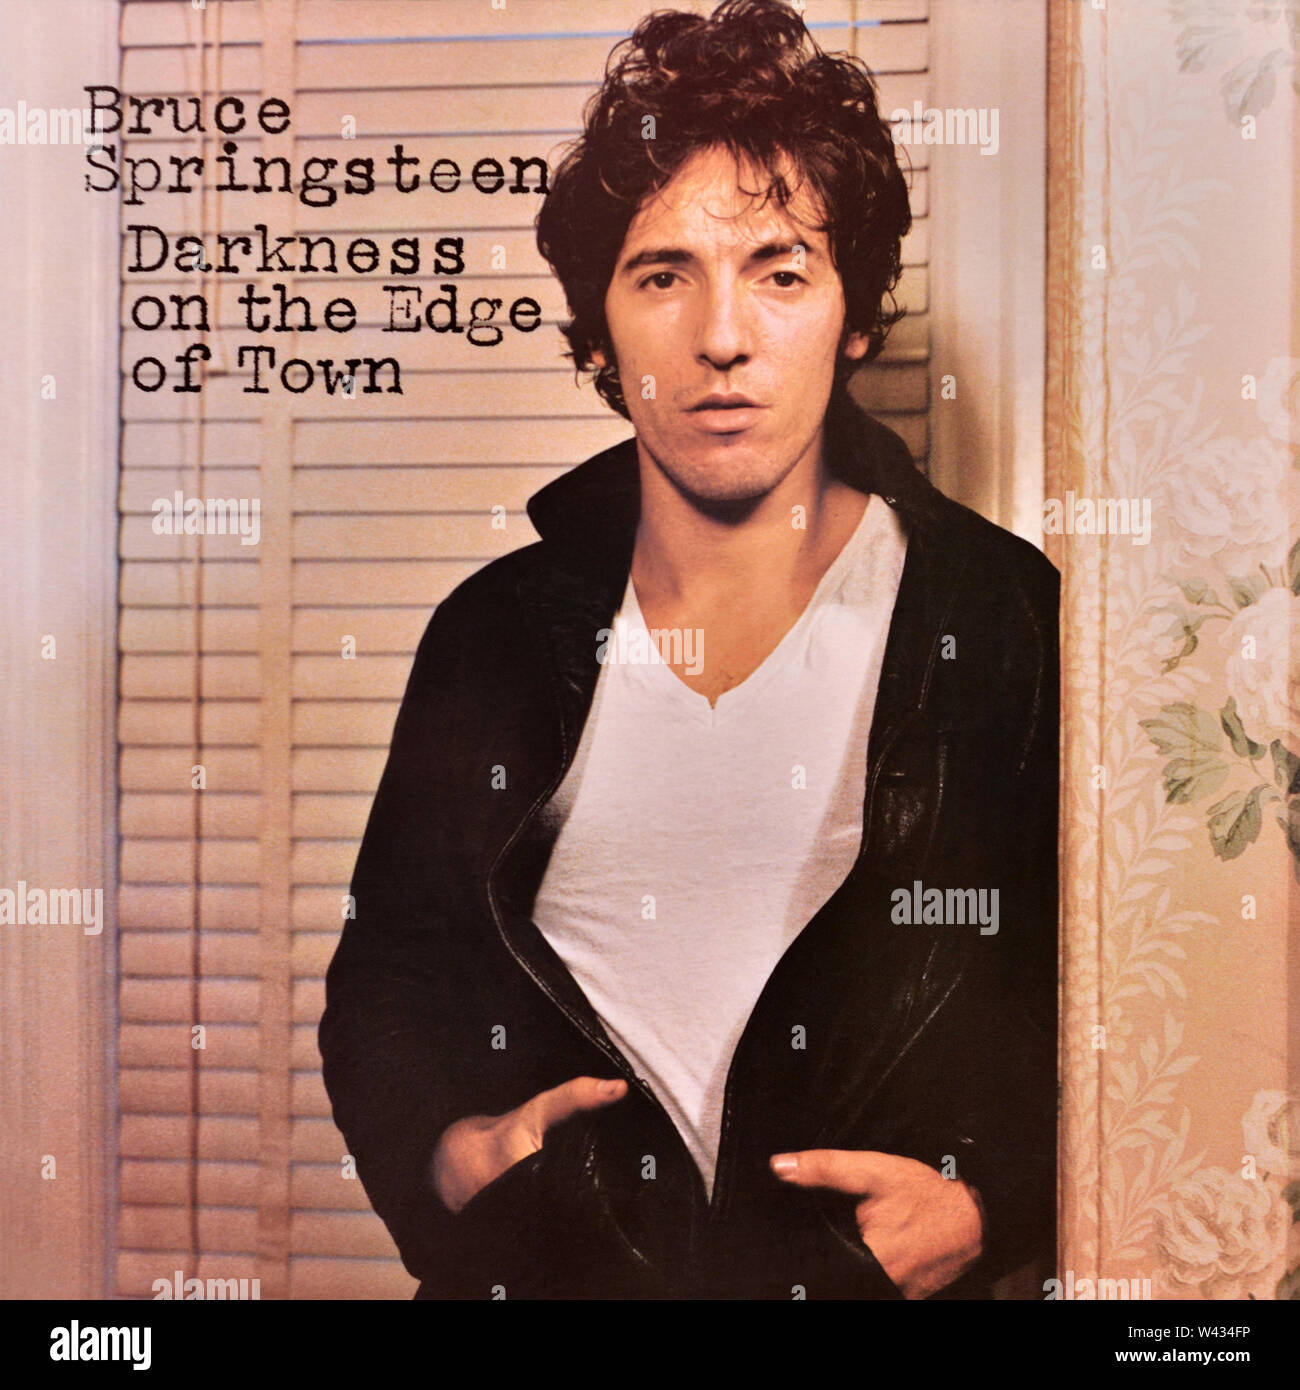 Bruce Springsteen - original vinyl album cover - Darkness On The Edge Of Town - 1978 Stock Photo